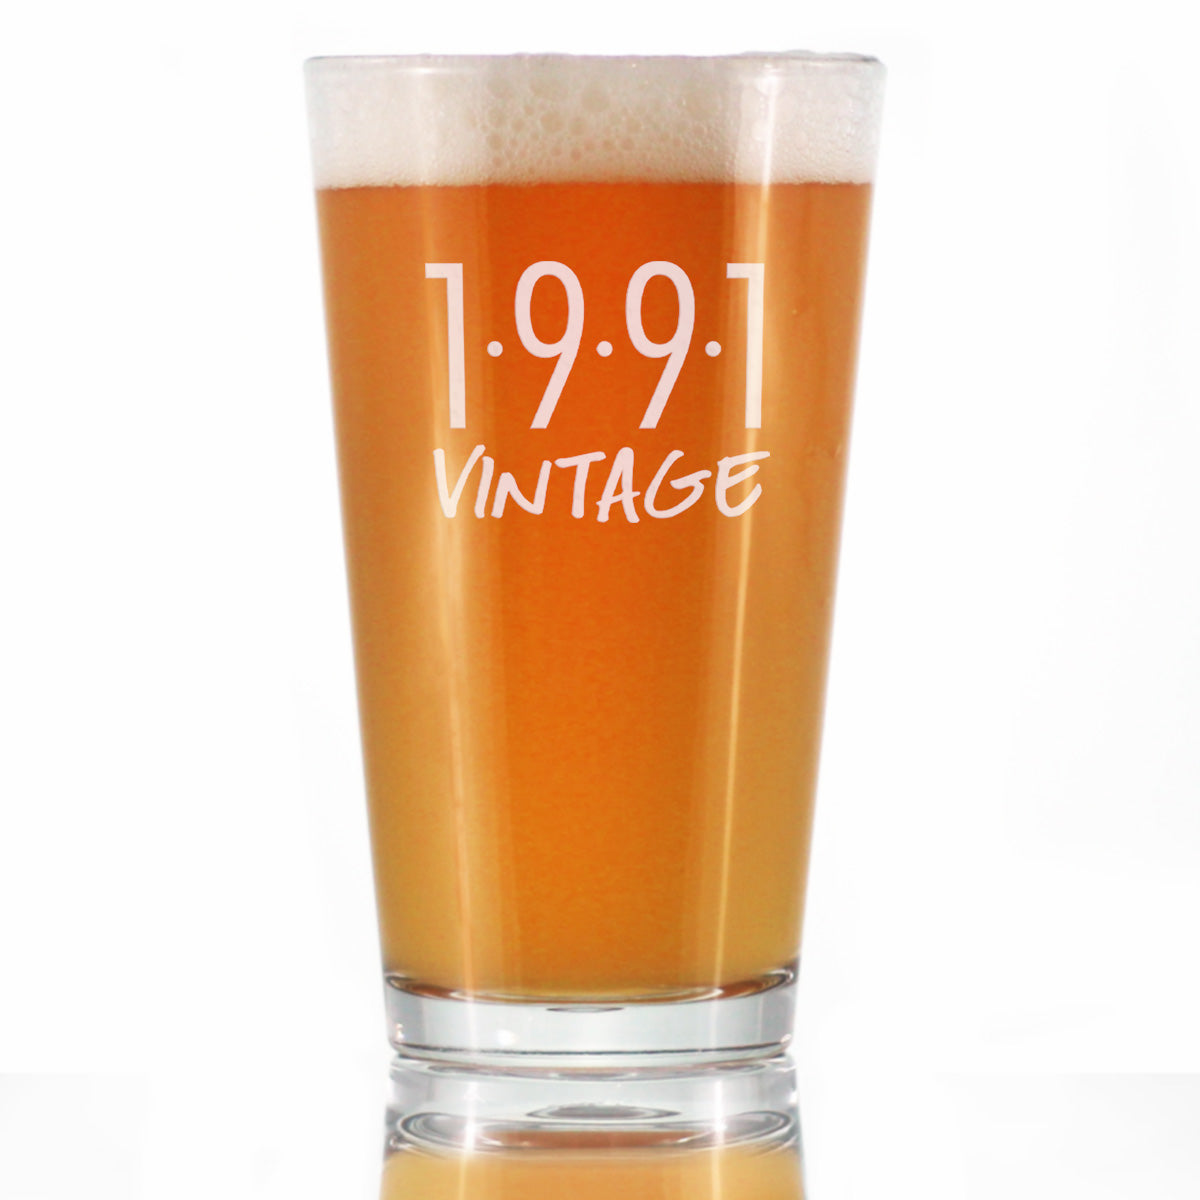 Vintage 1991 - Pint Glass for Beer - 32nd Birthday Gifts for Men or Women Turning 32 - Fun Bday Party Decor - 16 oz